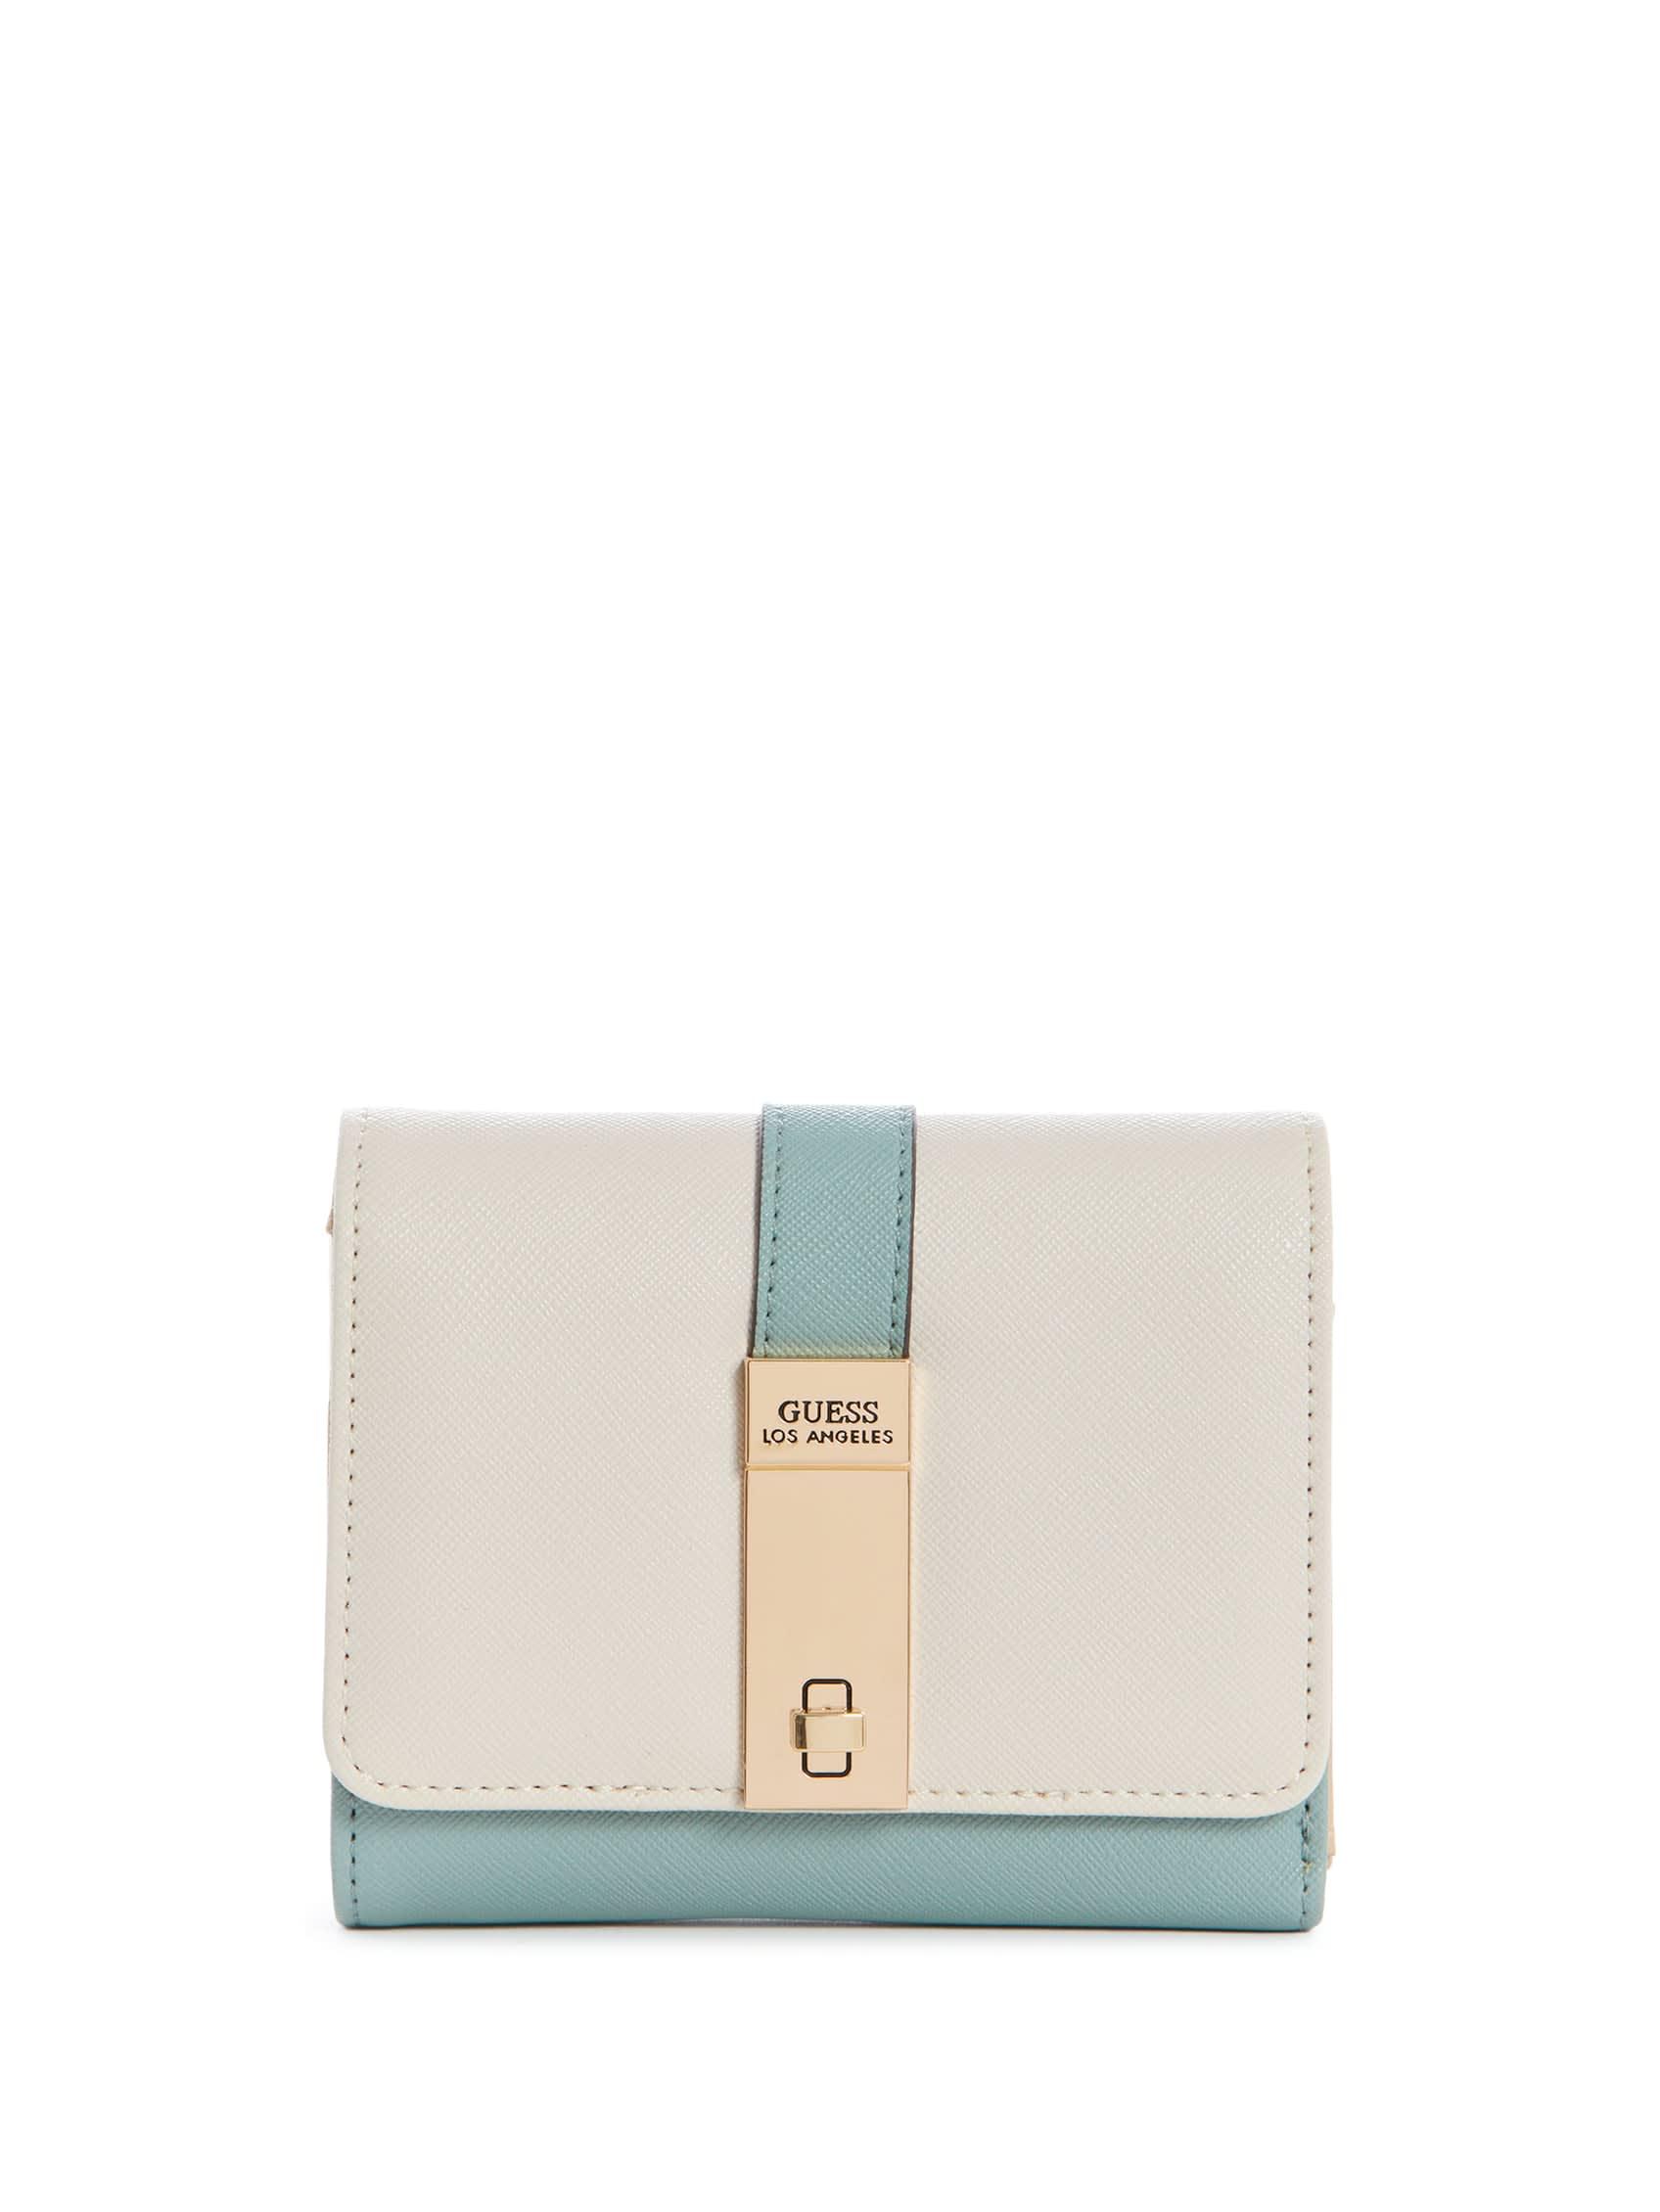 Guess Factory Cortni Trifold Wallet in White | Lyst